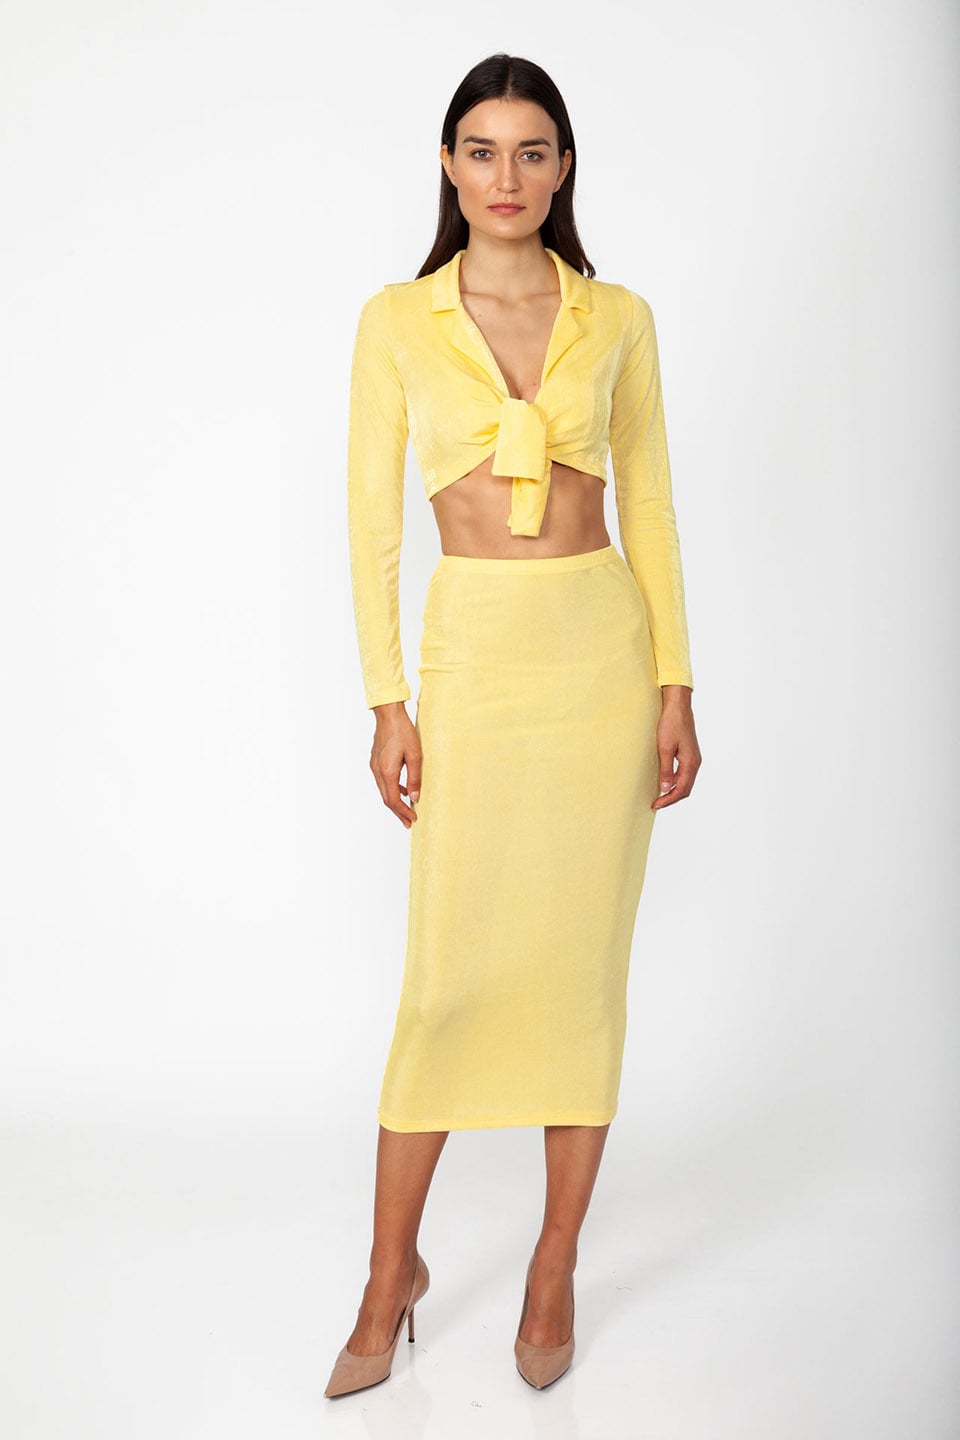 Model wearing set of top and skirt in yellow color with long sleeves and crop top, posing for front view